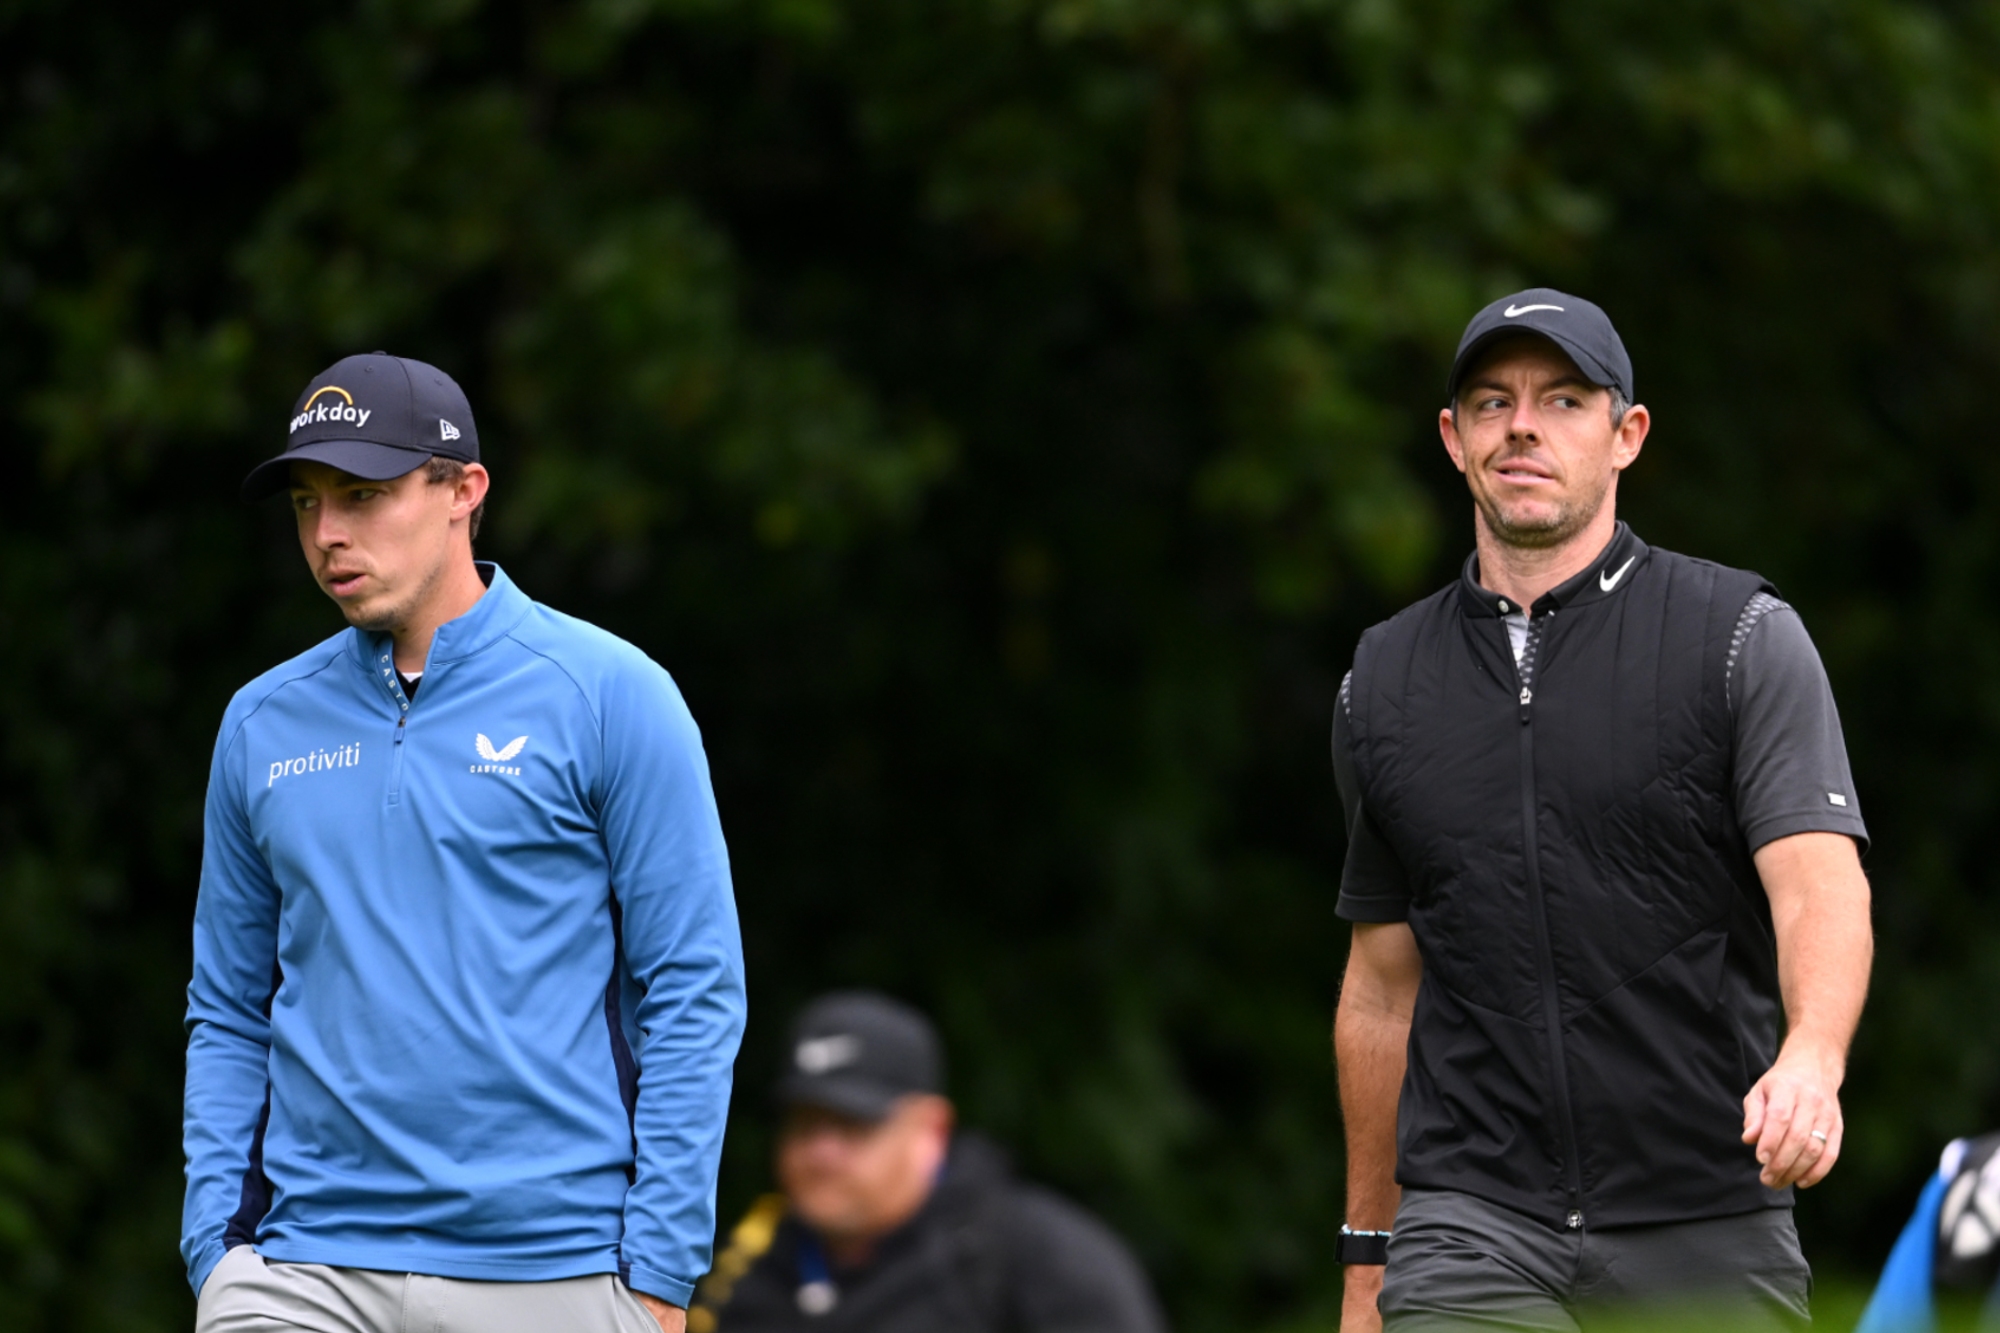 'Winning is worth more': McIlroy and Fitzpatrick divided over LIV's Ryder Cup inclusion